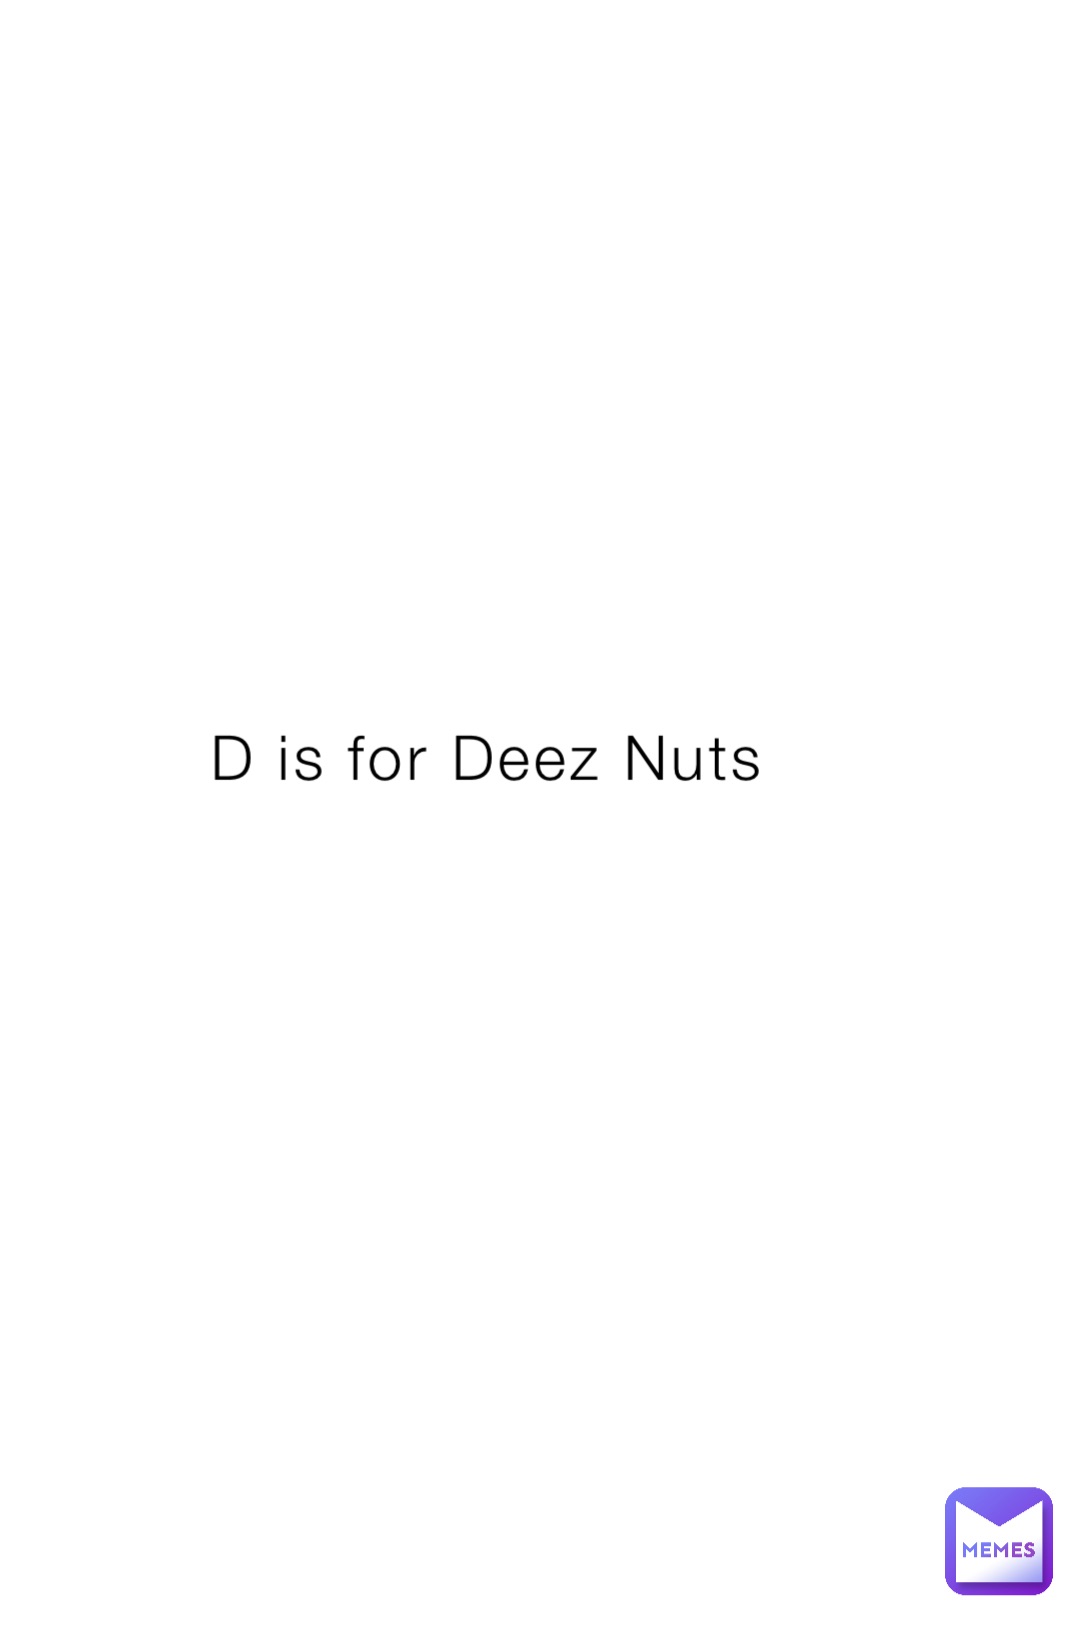 D is for Deez Nuts